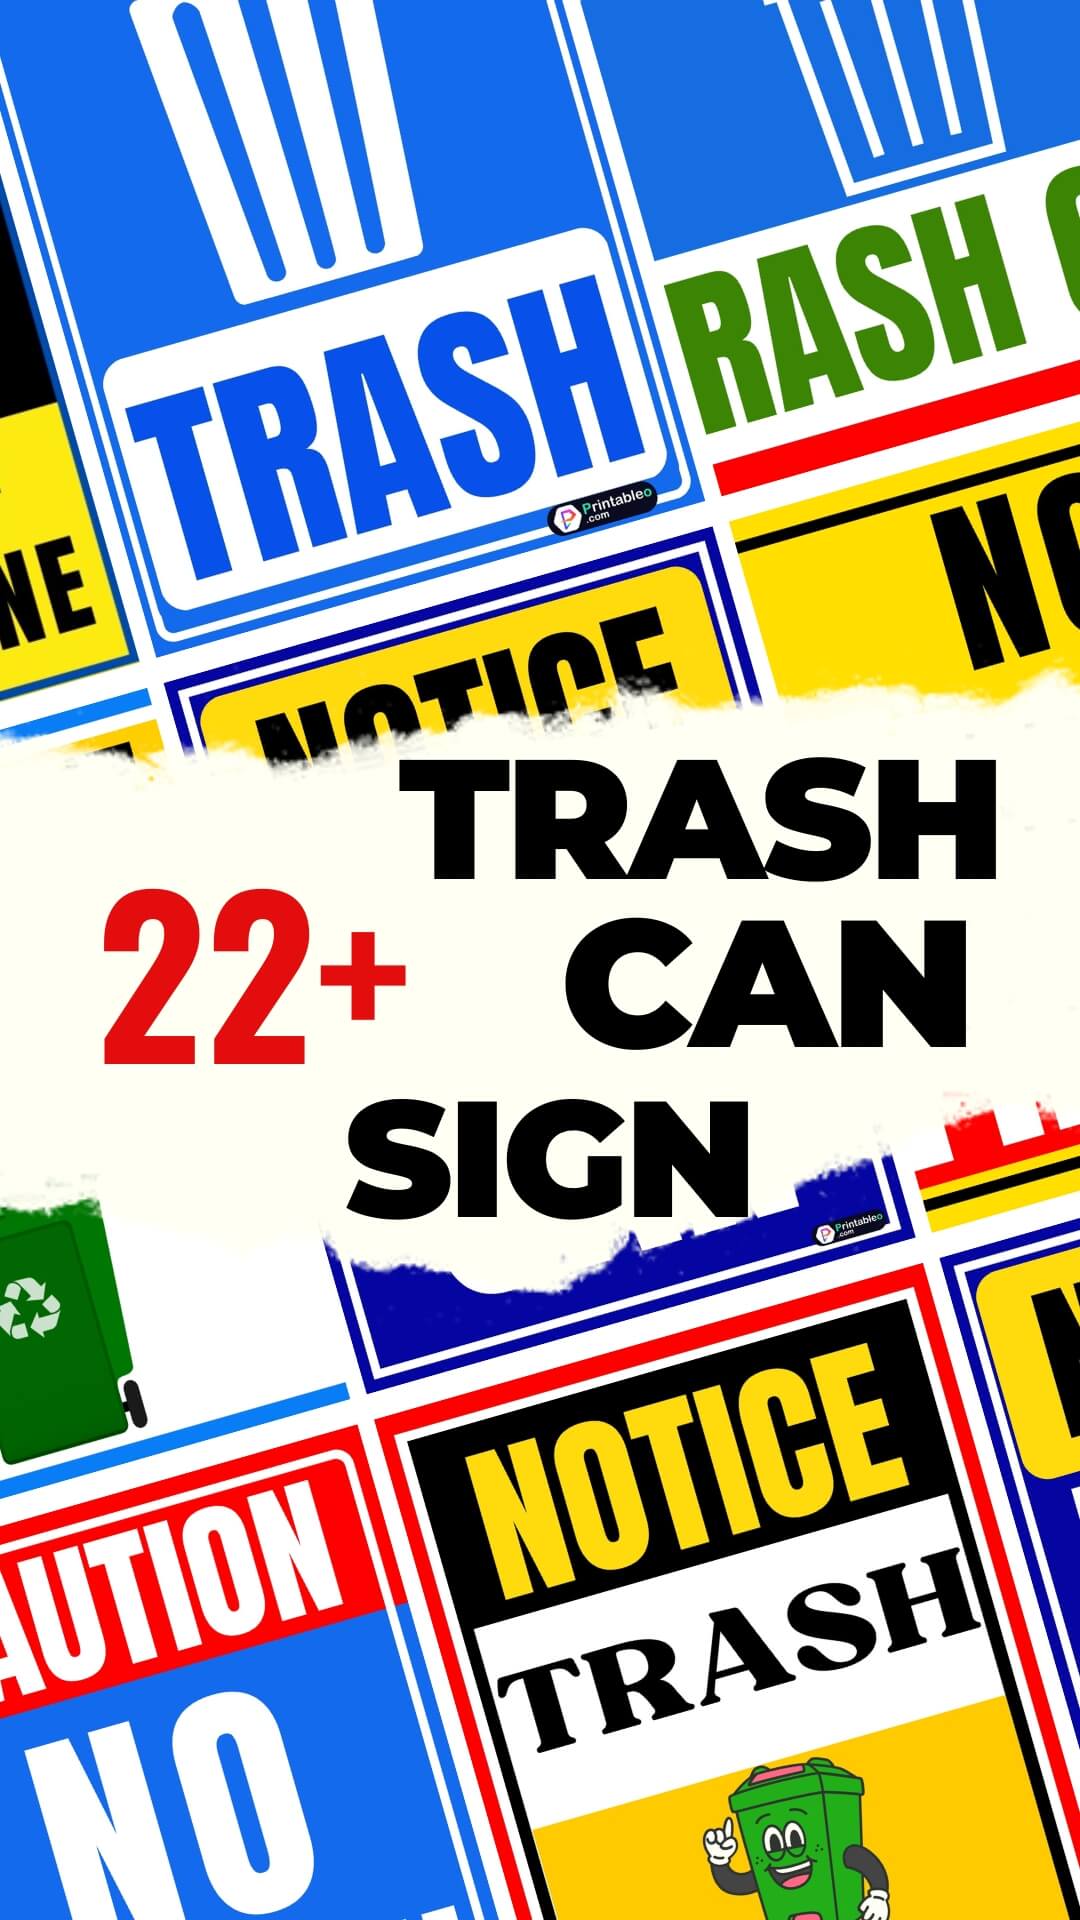 22+ Trash Can Sign